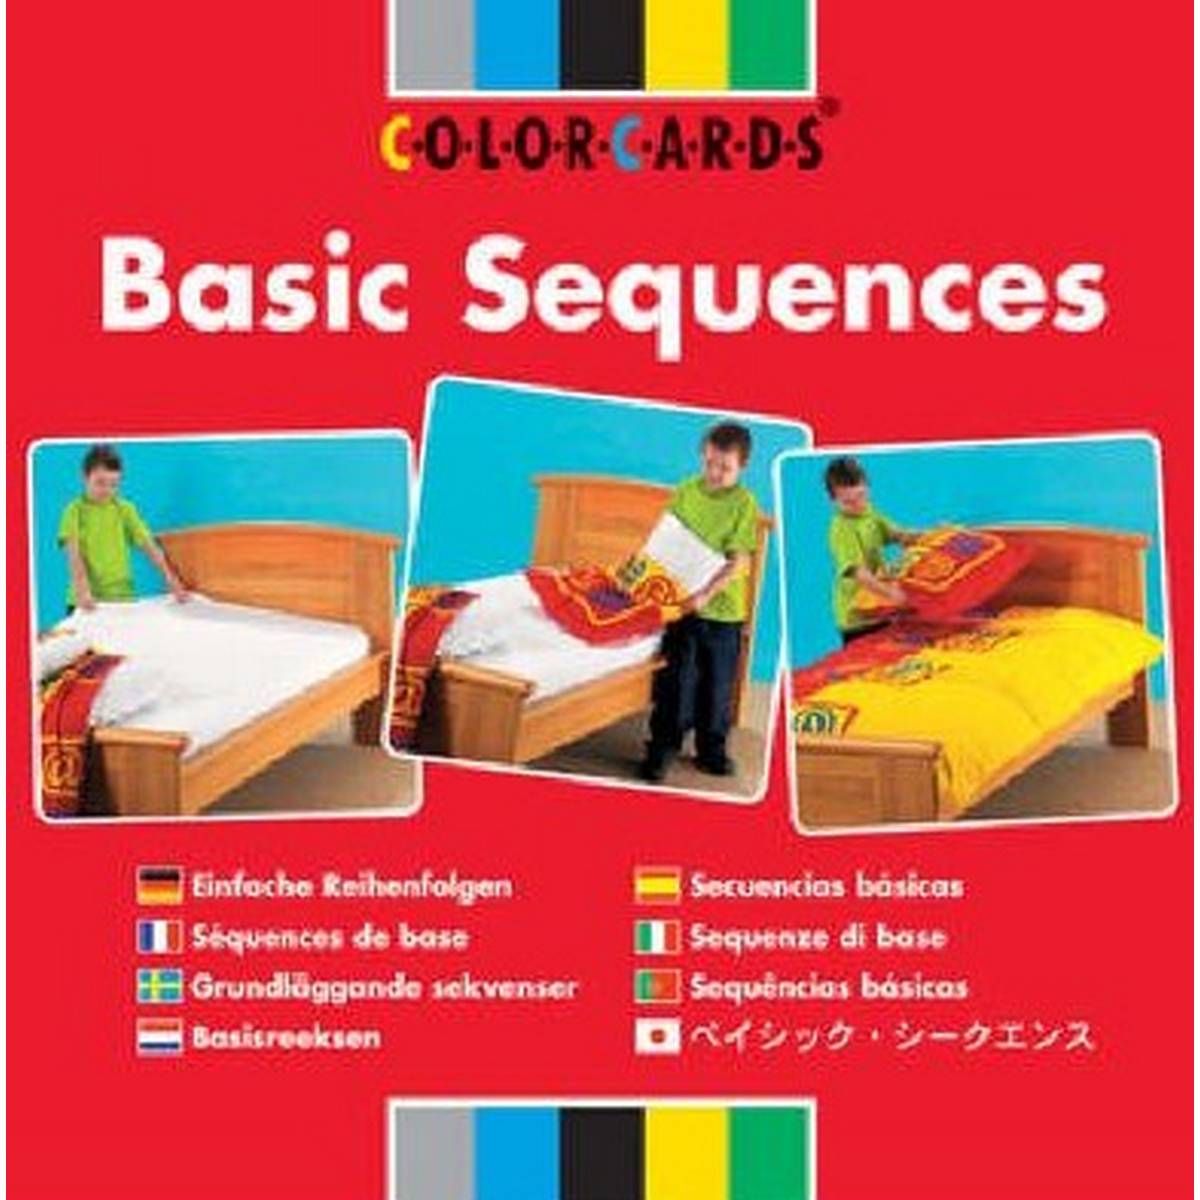 ColorCards: Basic Sequences